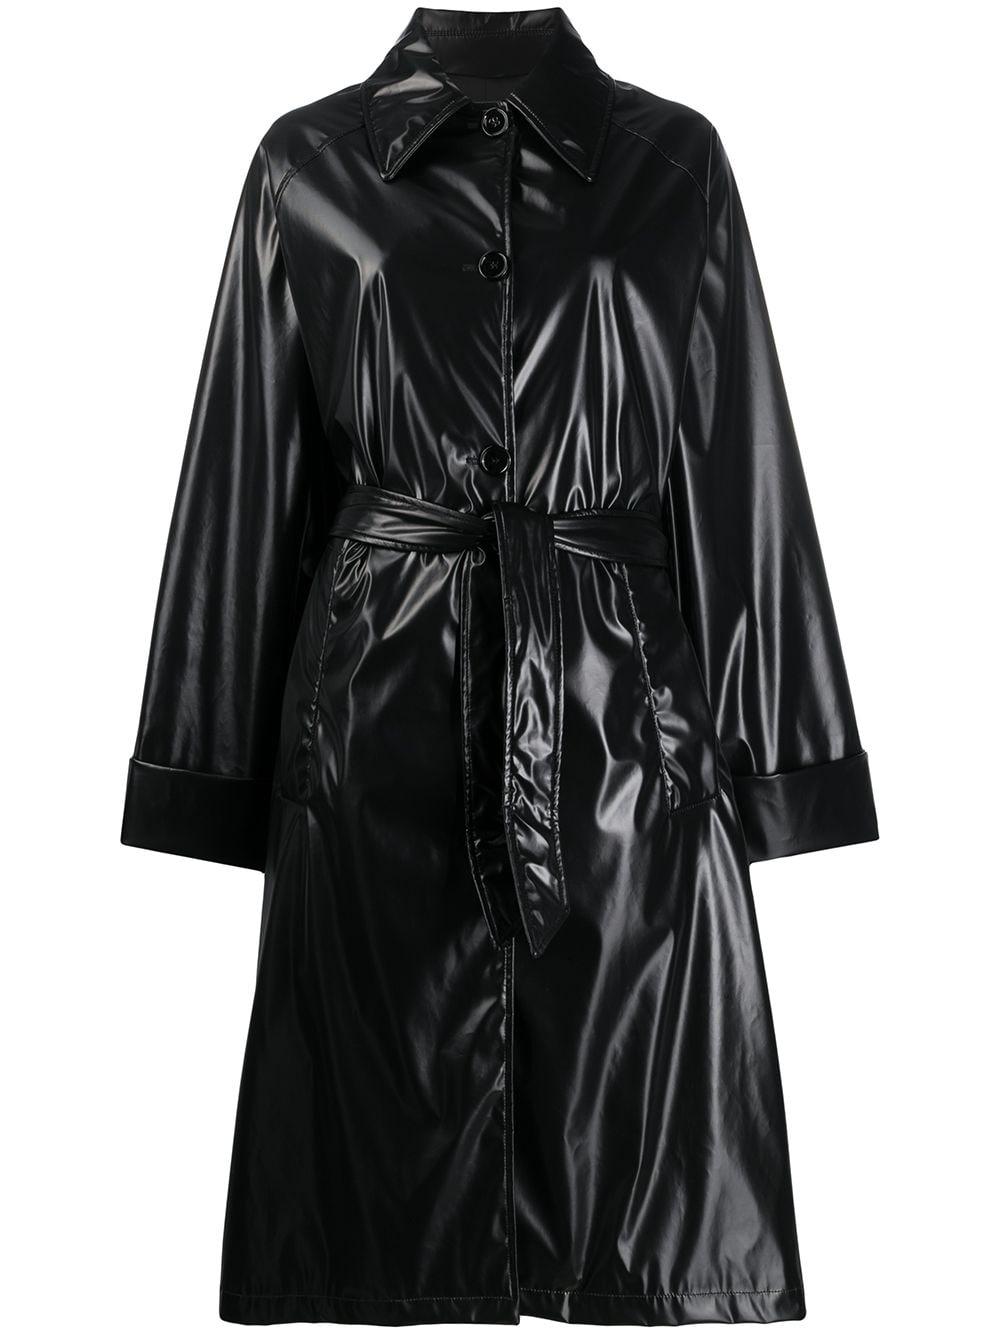 MM6 by Maison Martin Margiela Leather-look Patent Trench Coat in Black ...